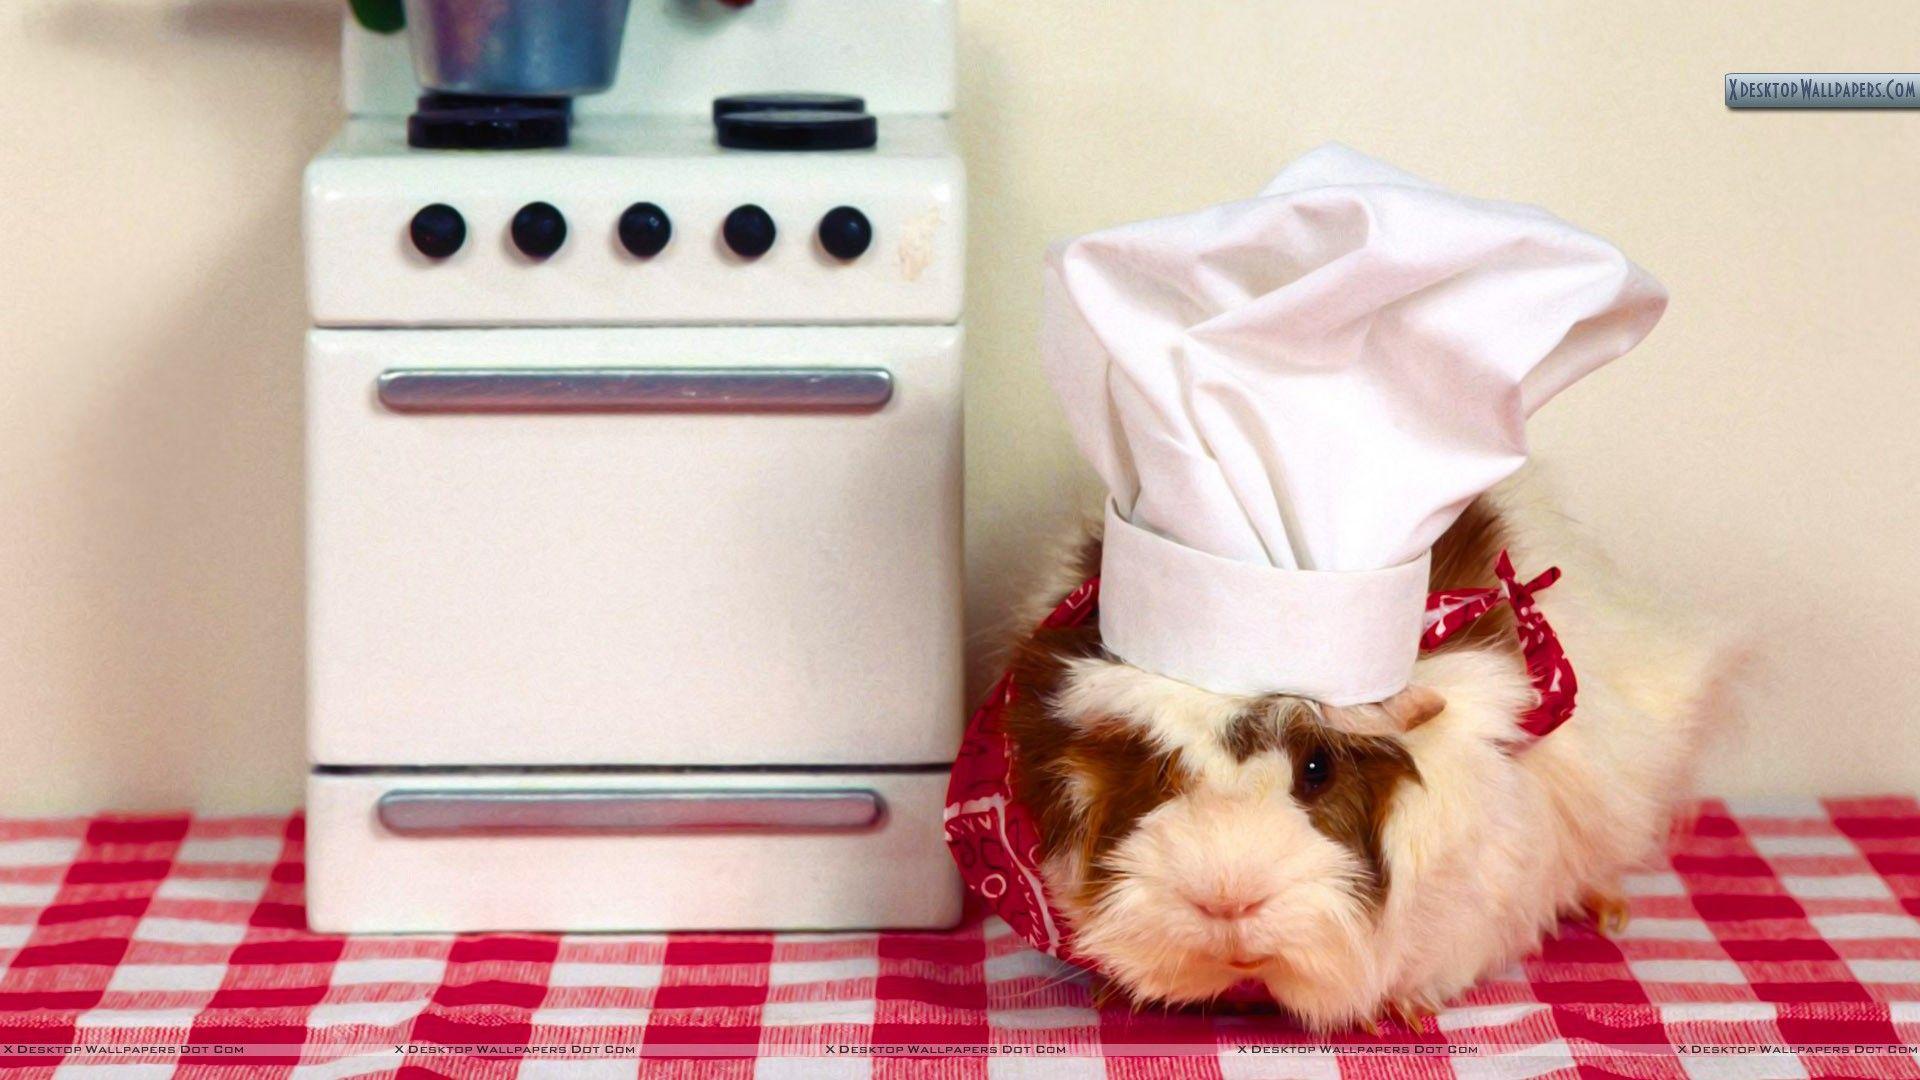 What's Cooking Guinea Pig Wallpaper